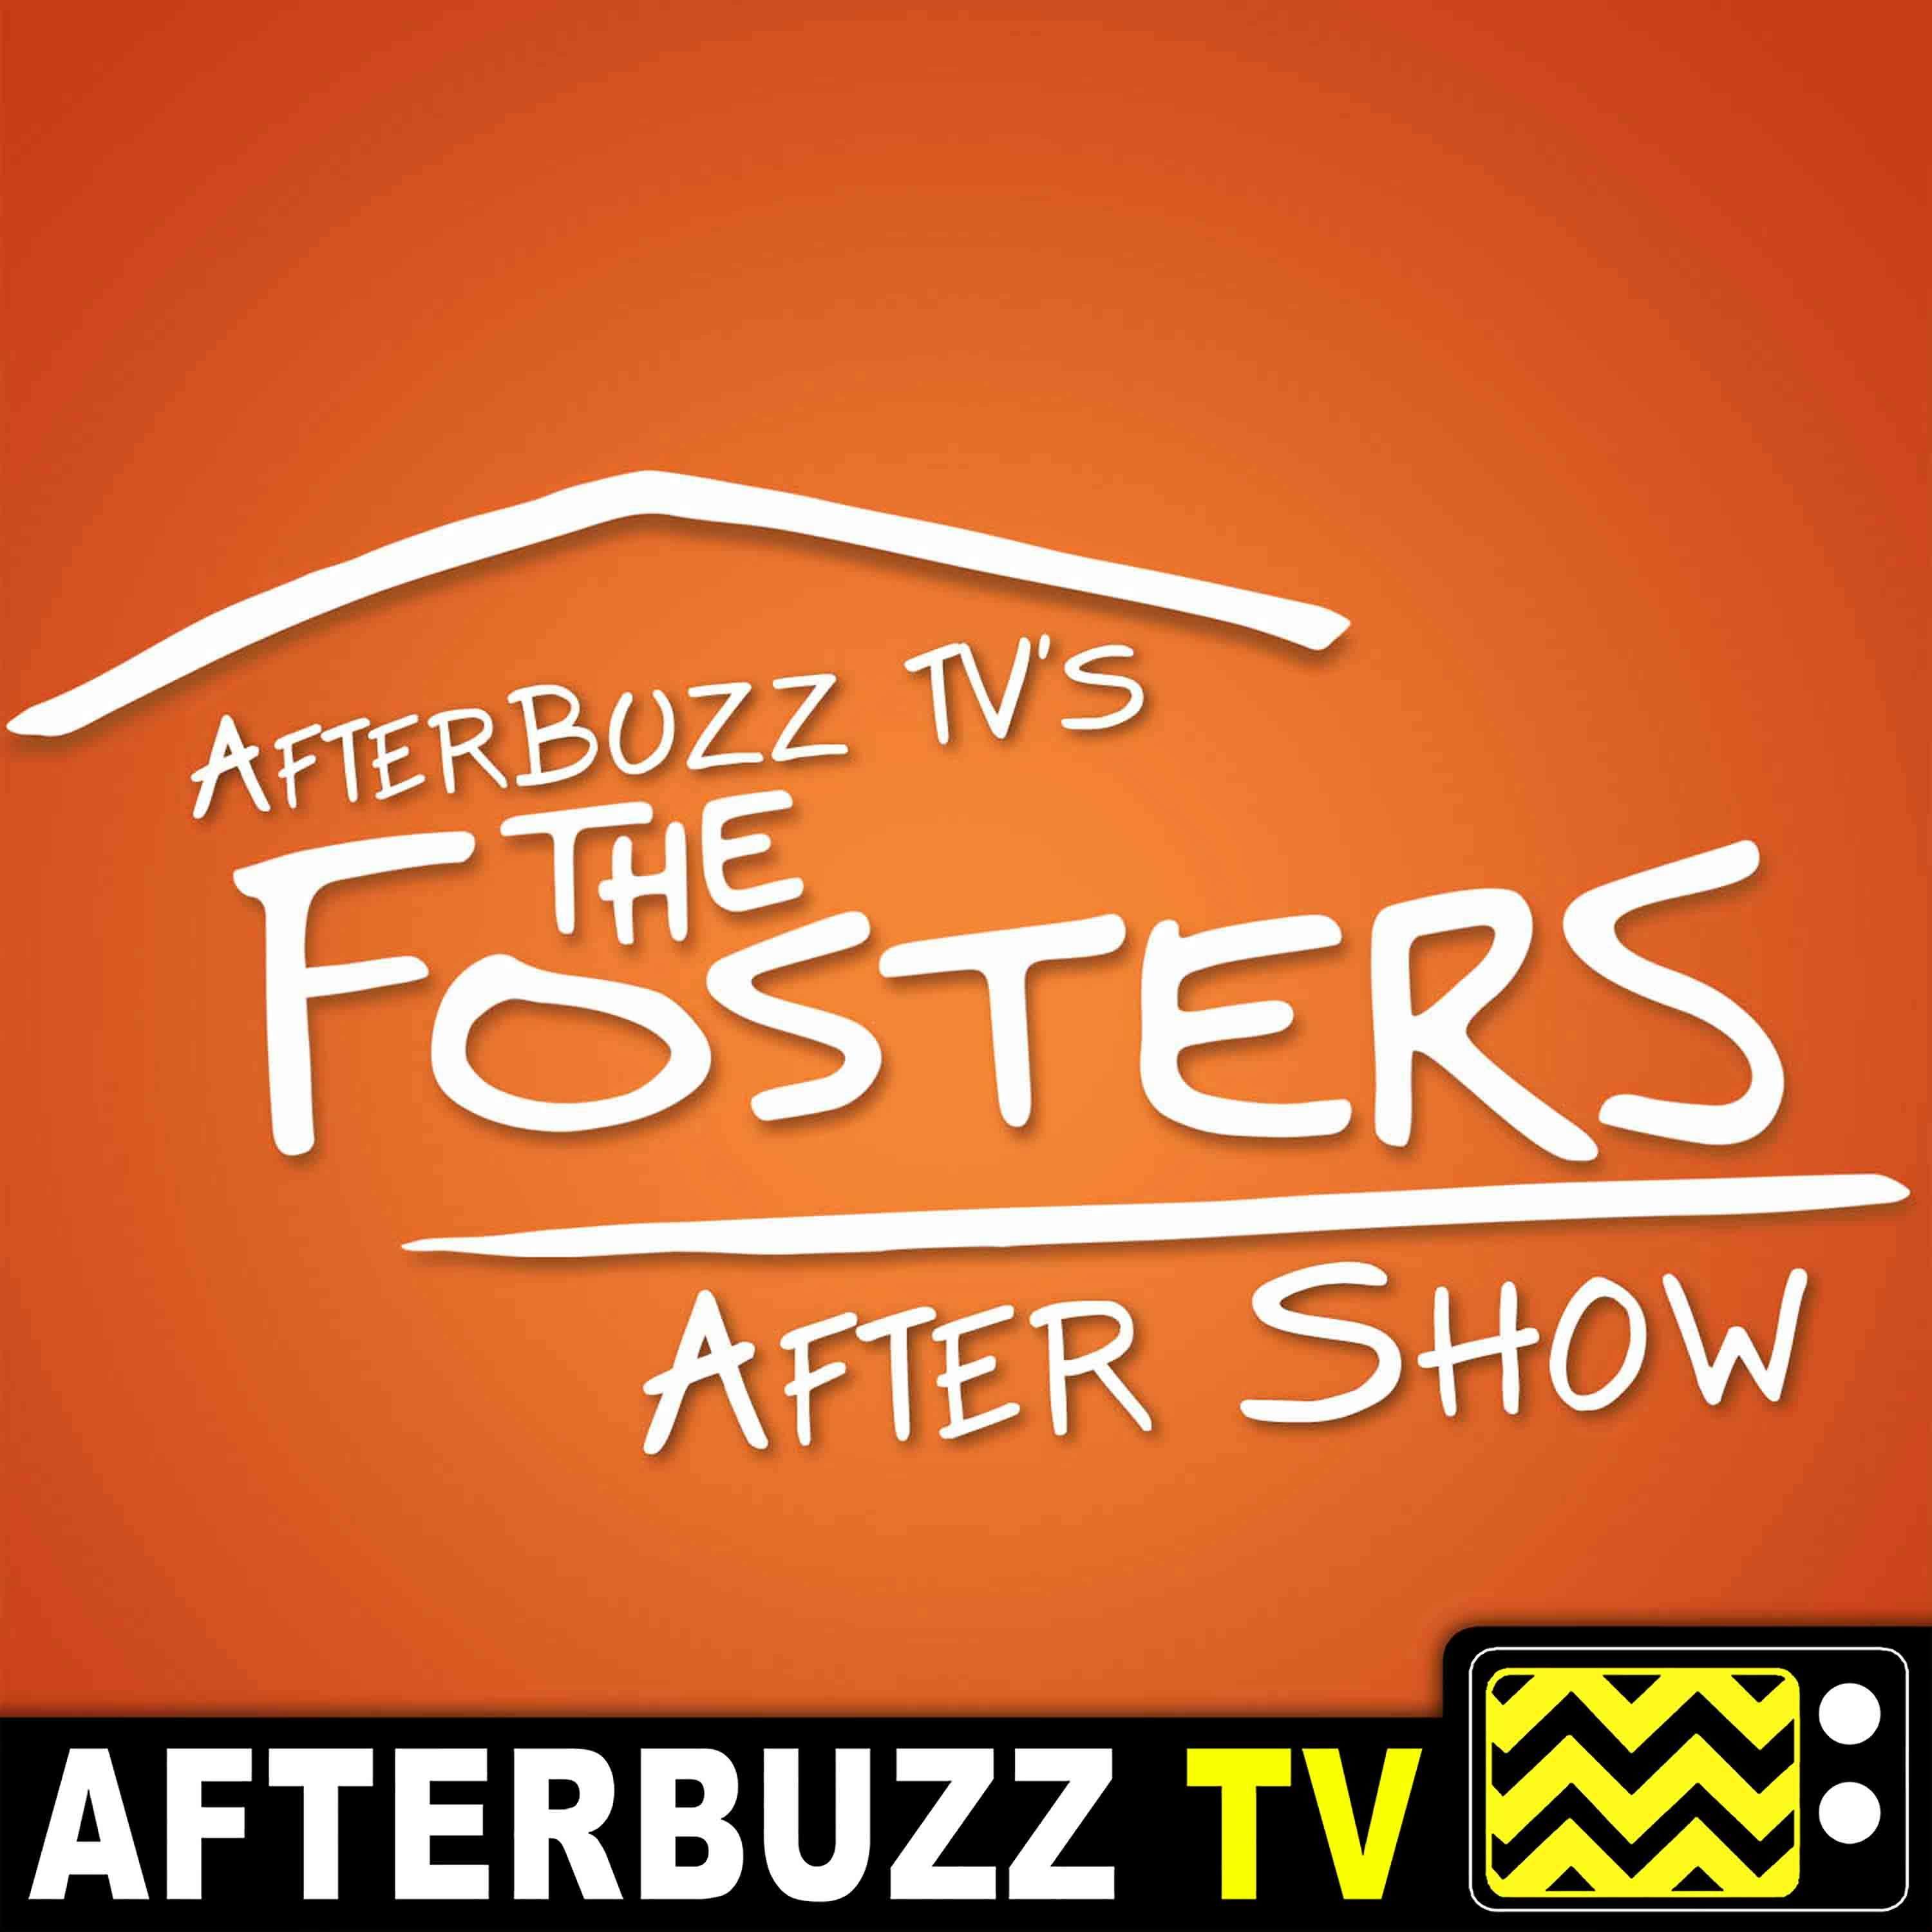 The Fosters S:5 | Hayden Byerly & Kalama Epstein Guest on #IWasMadeInAmerica E:12 | AfterBuzz TV AfterShow